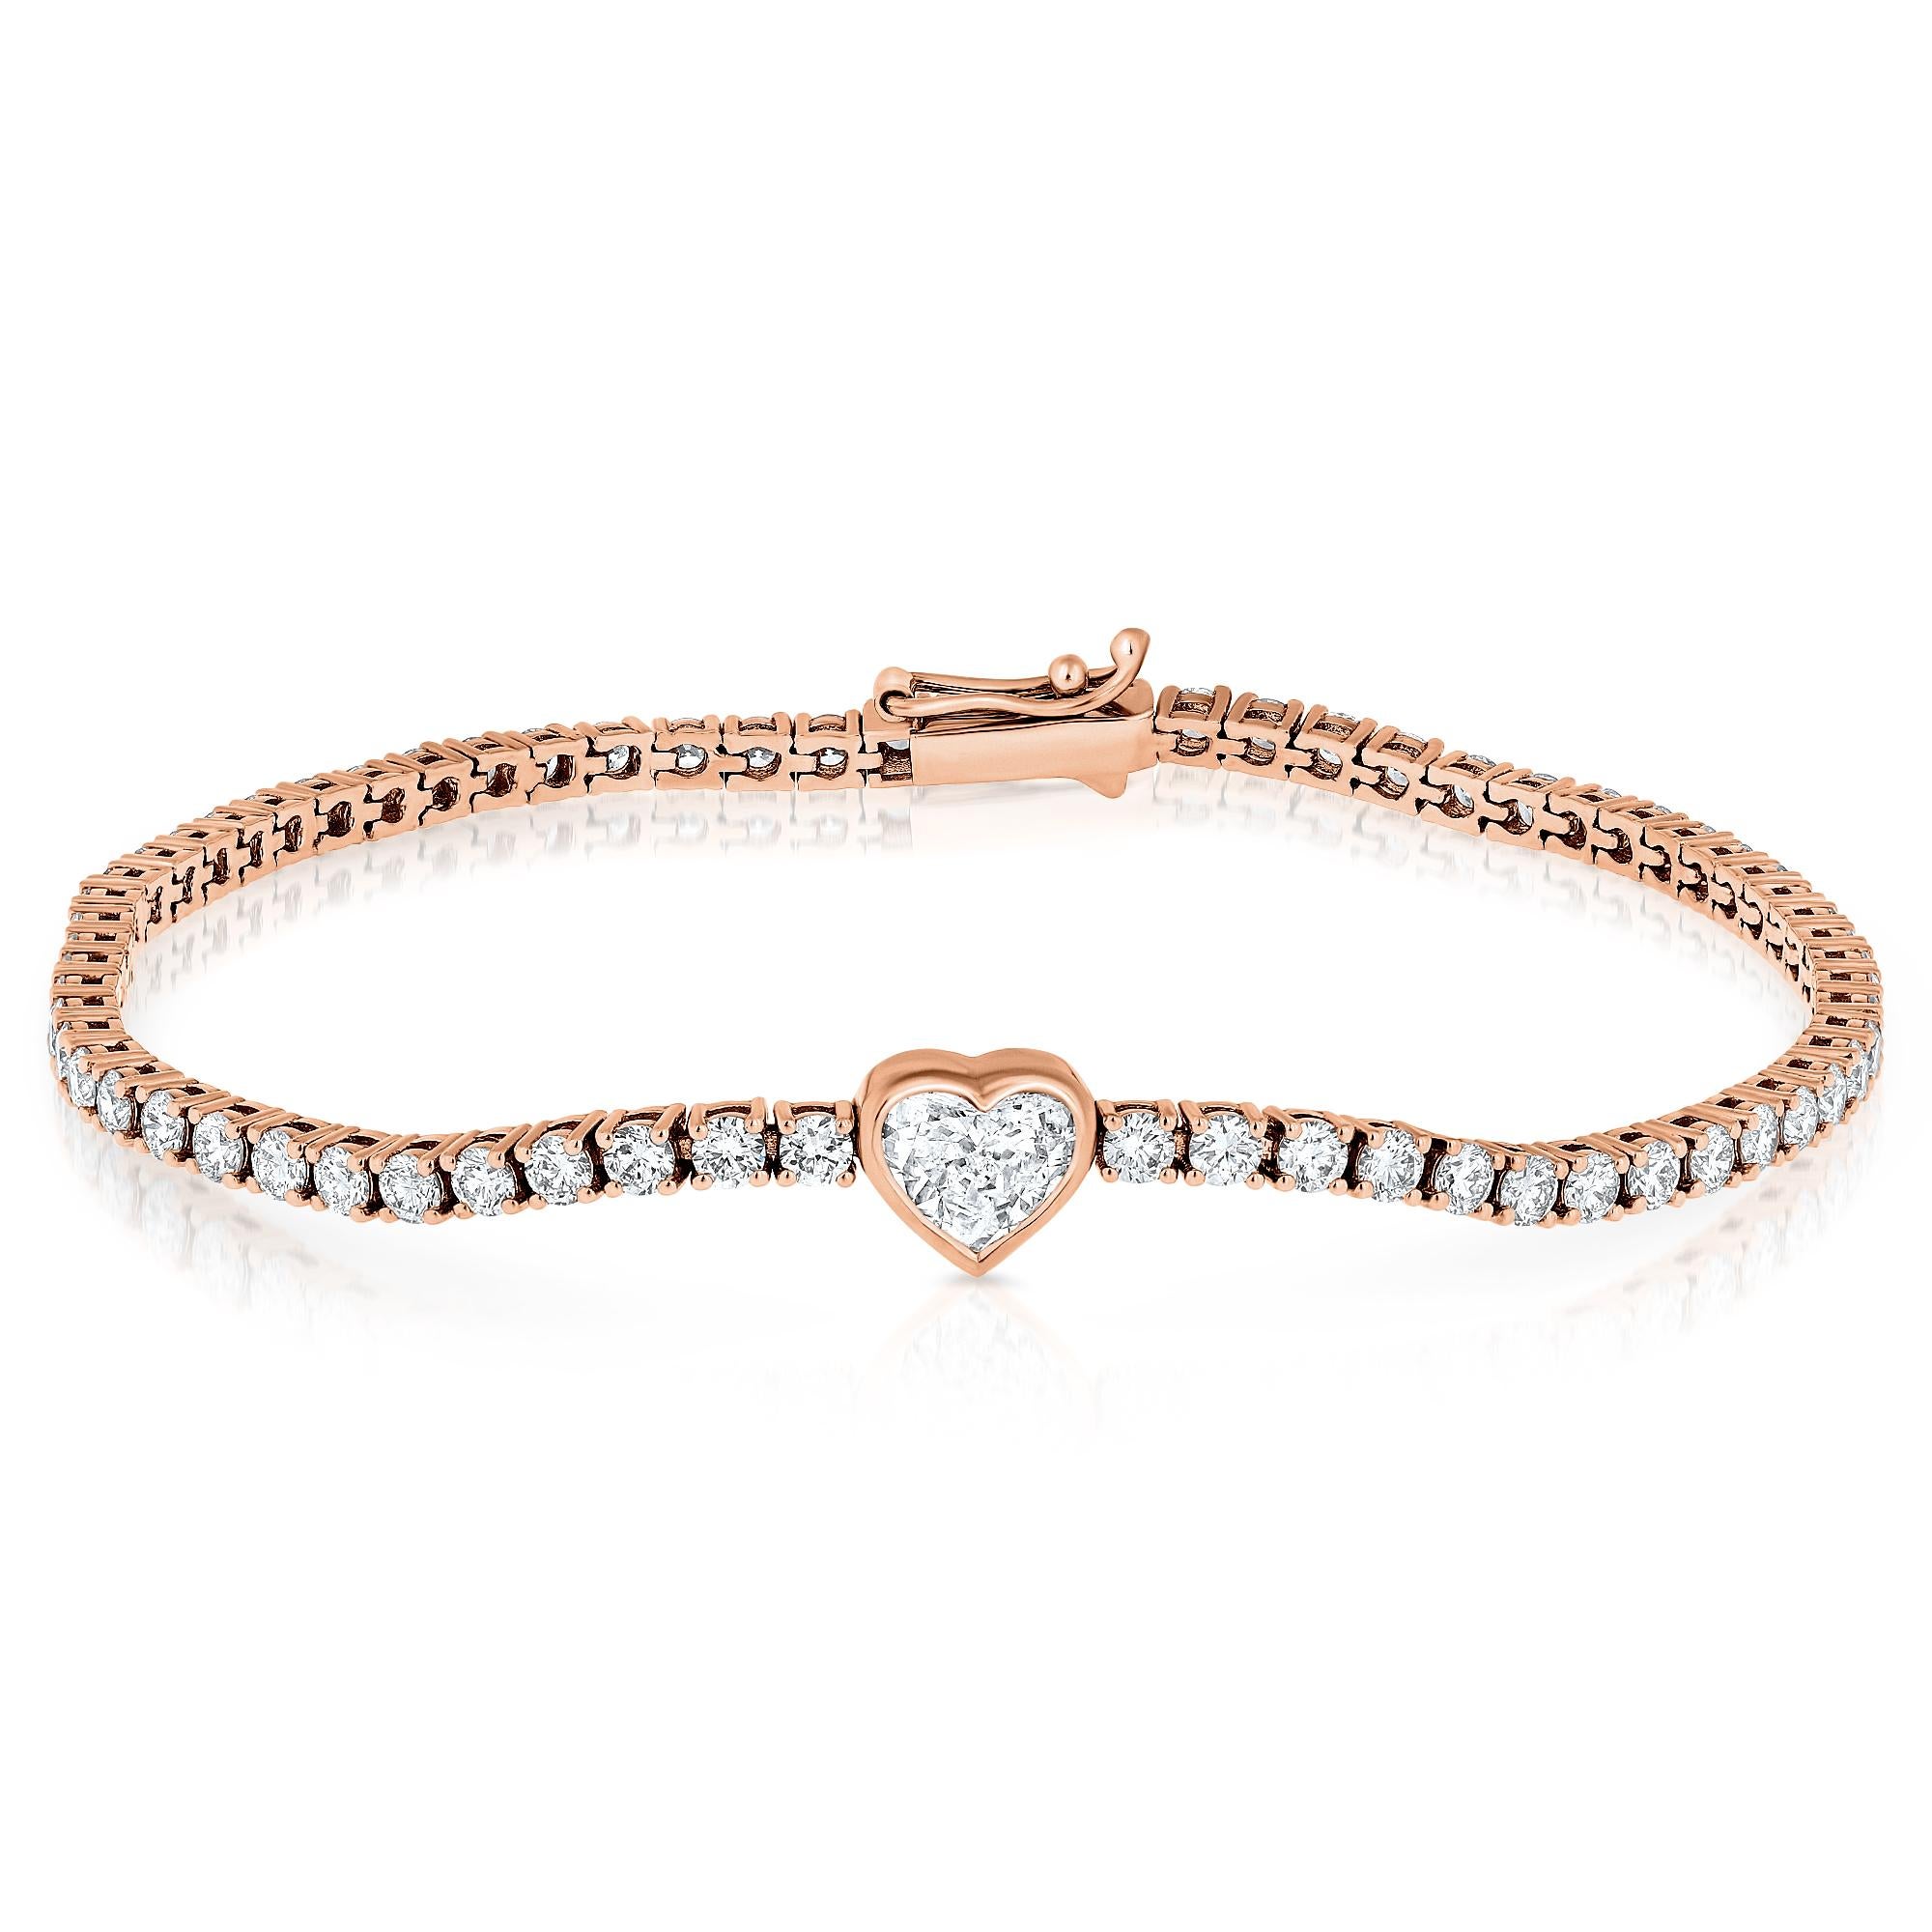 Meet our stunning White Diamond Tennis Bracelet, a total head-turner at 3.41 carats. The main attraction? A sweet 0.64-carat heart-shaped white diamond, adding just the right touch of charm. Crafted with care in 14K rose gold, it's got the perfect